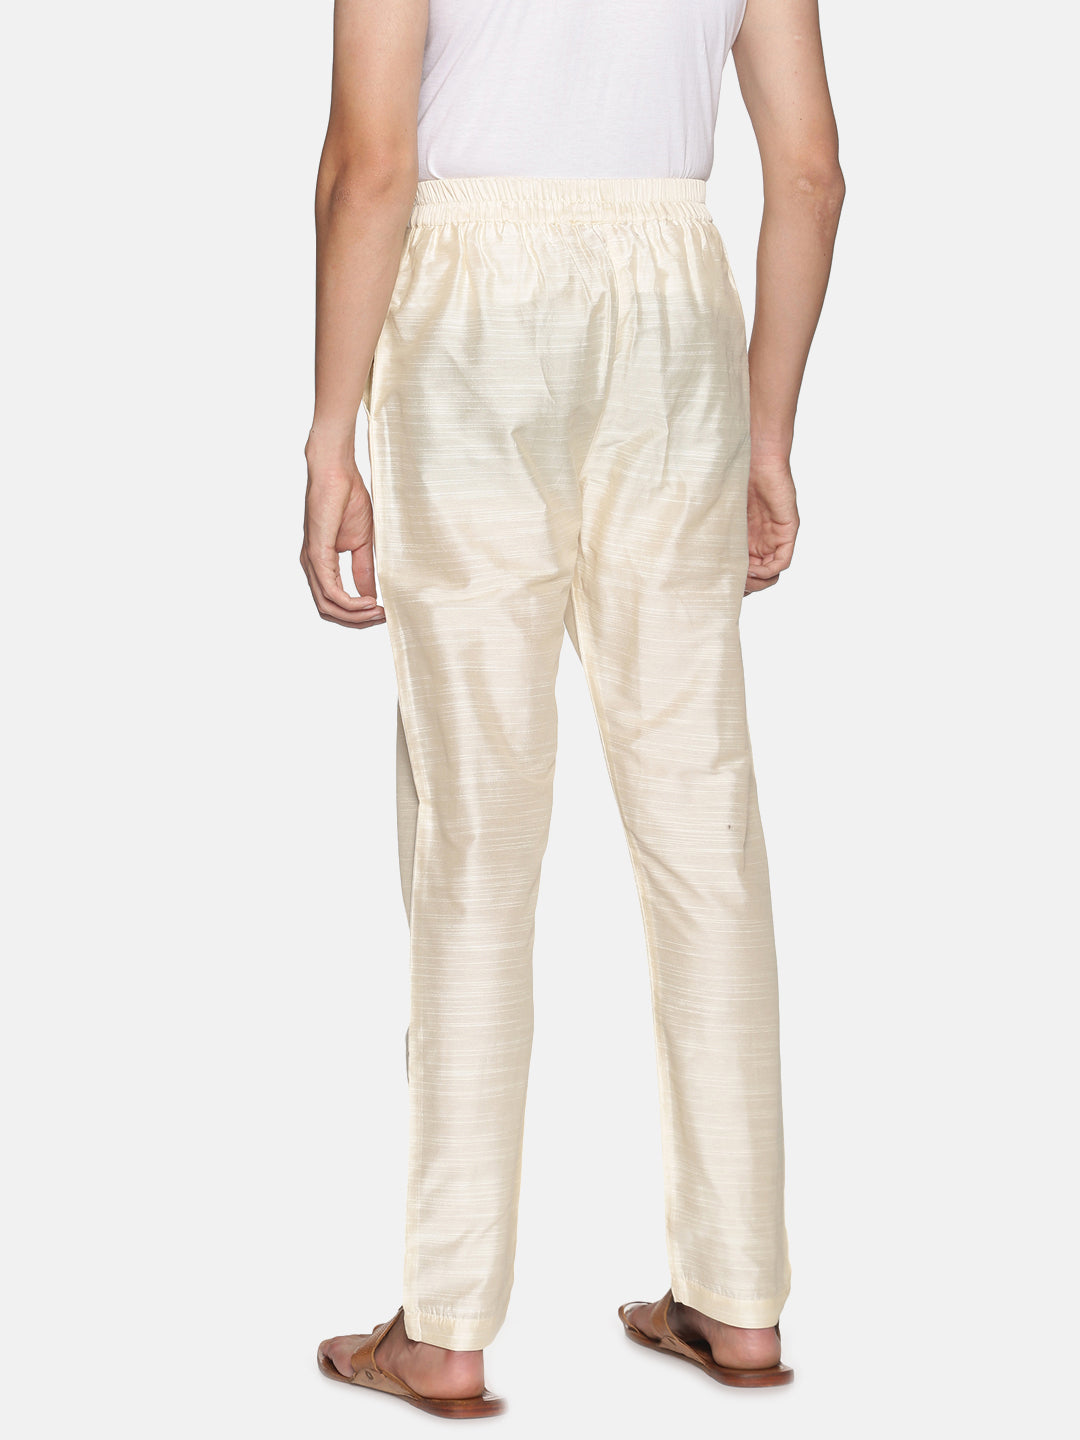 Pack of 2 Off White & Gold Art Silk Trousers with Drawstring